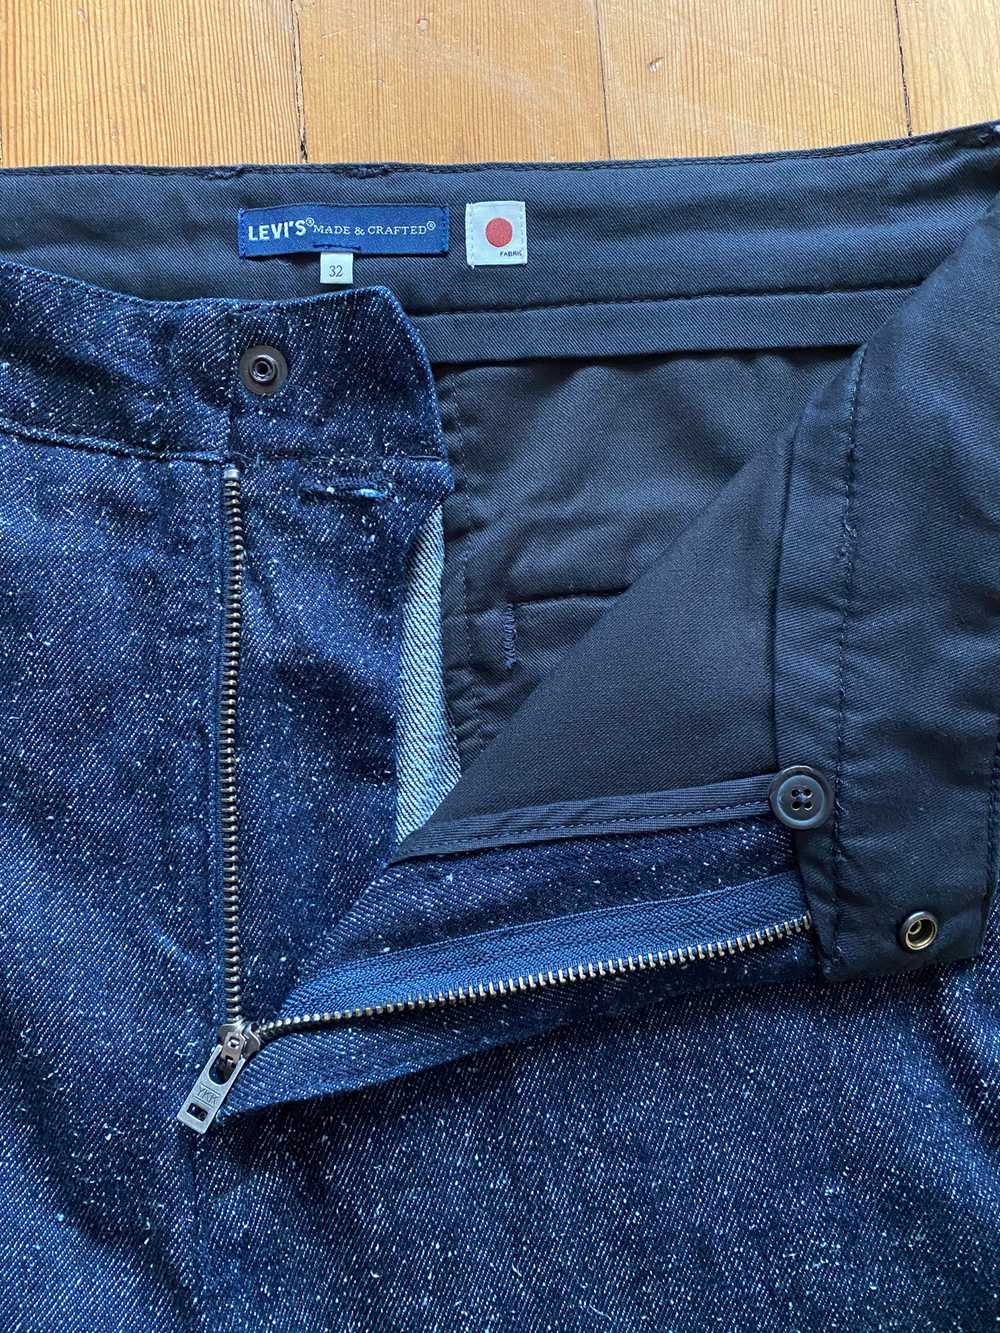 Levi's Made & Crafted Levi's made and crafted Jap… - image 4